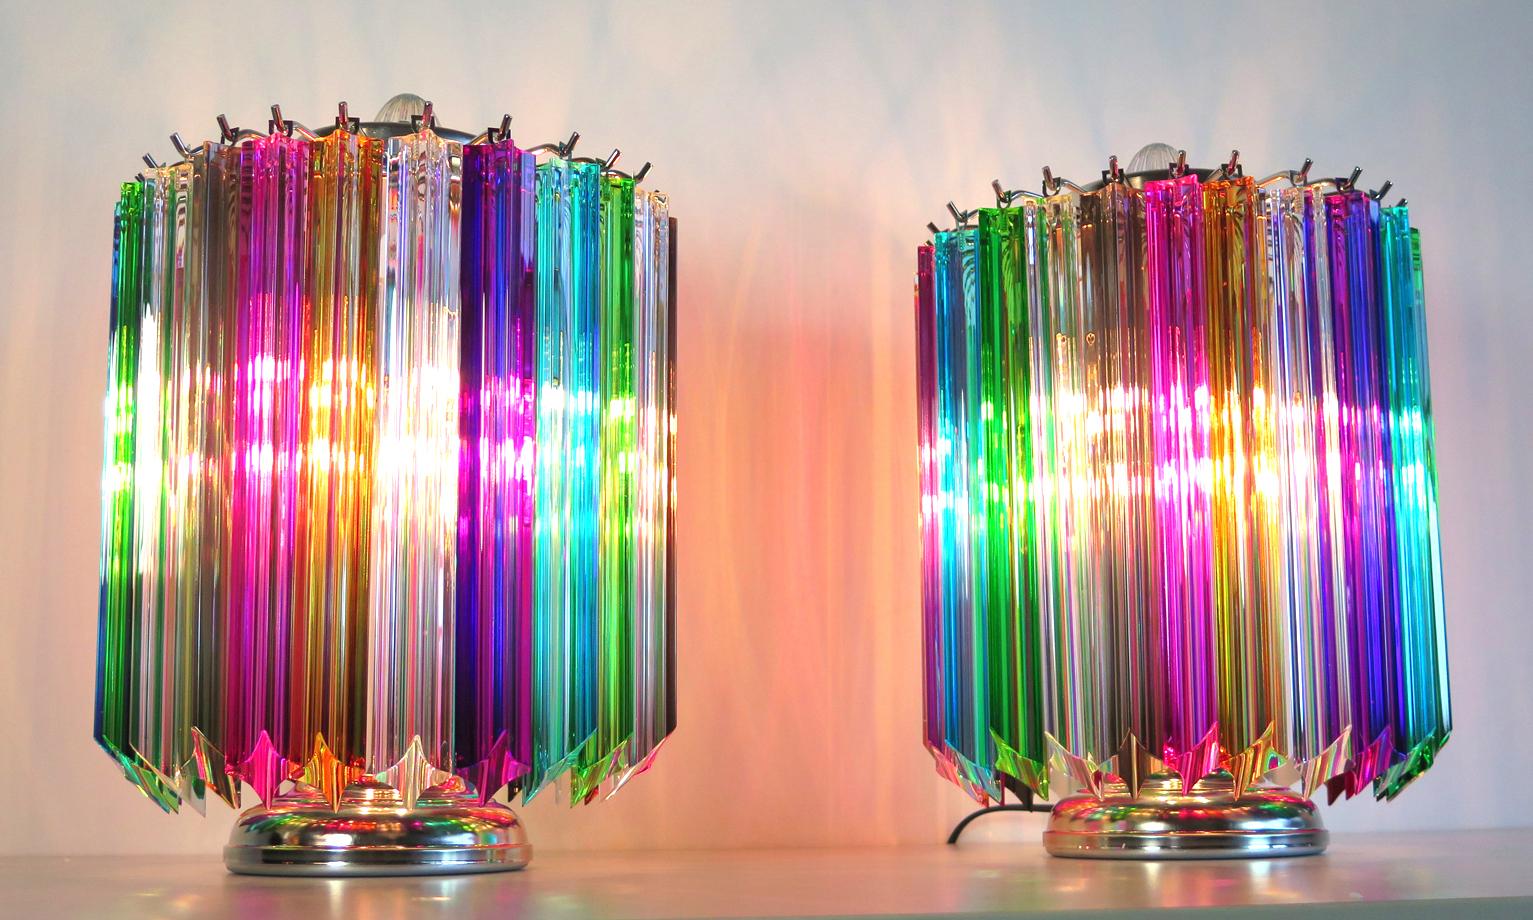 Multi-color Quadriedri table lamp - Mariangela model
Magnificent pair of table lamps, 24 Quadriedri Murano crystal multicolored prism for each lamp. Nickel metal frame. Elegant object of furniture.
Period: Late 20th century
Dimensions: 15 inches